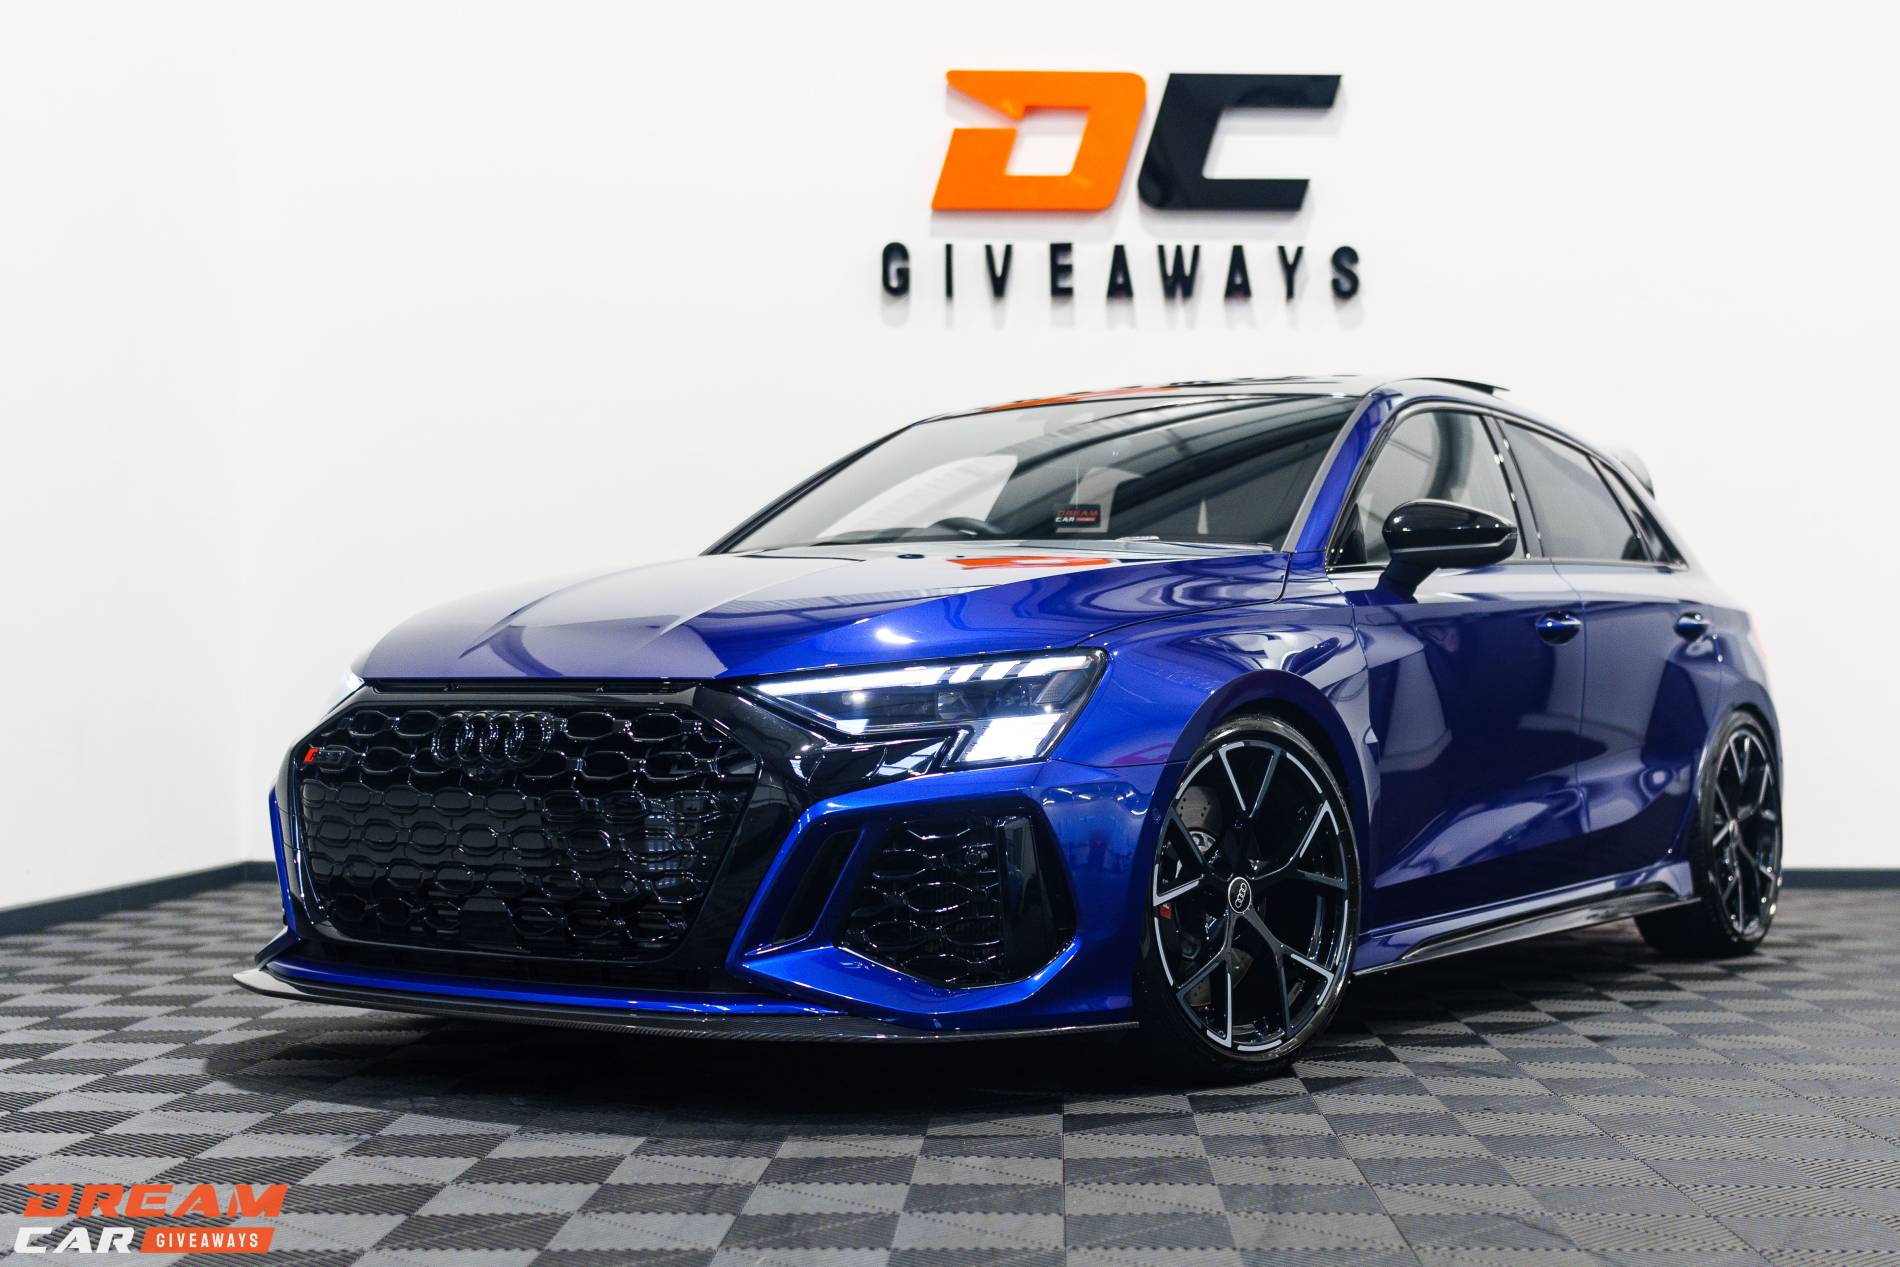 Win this 2023 Audi RS3 Vorsprung & £5,000 or £48,000 Tax Free